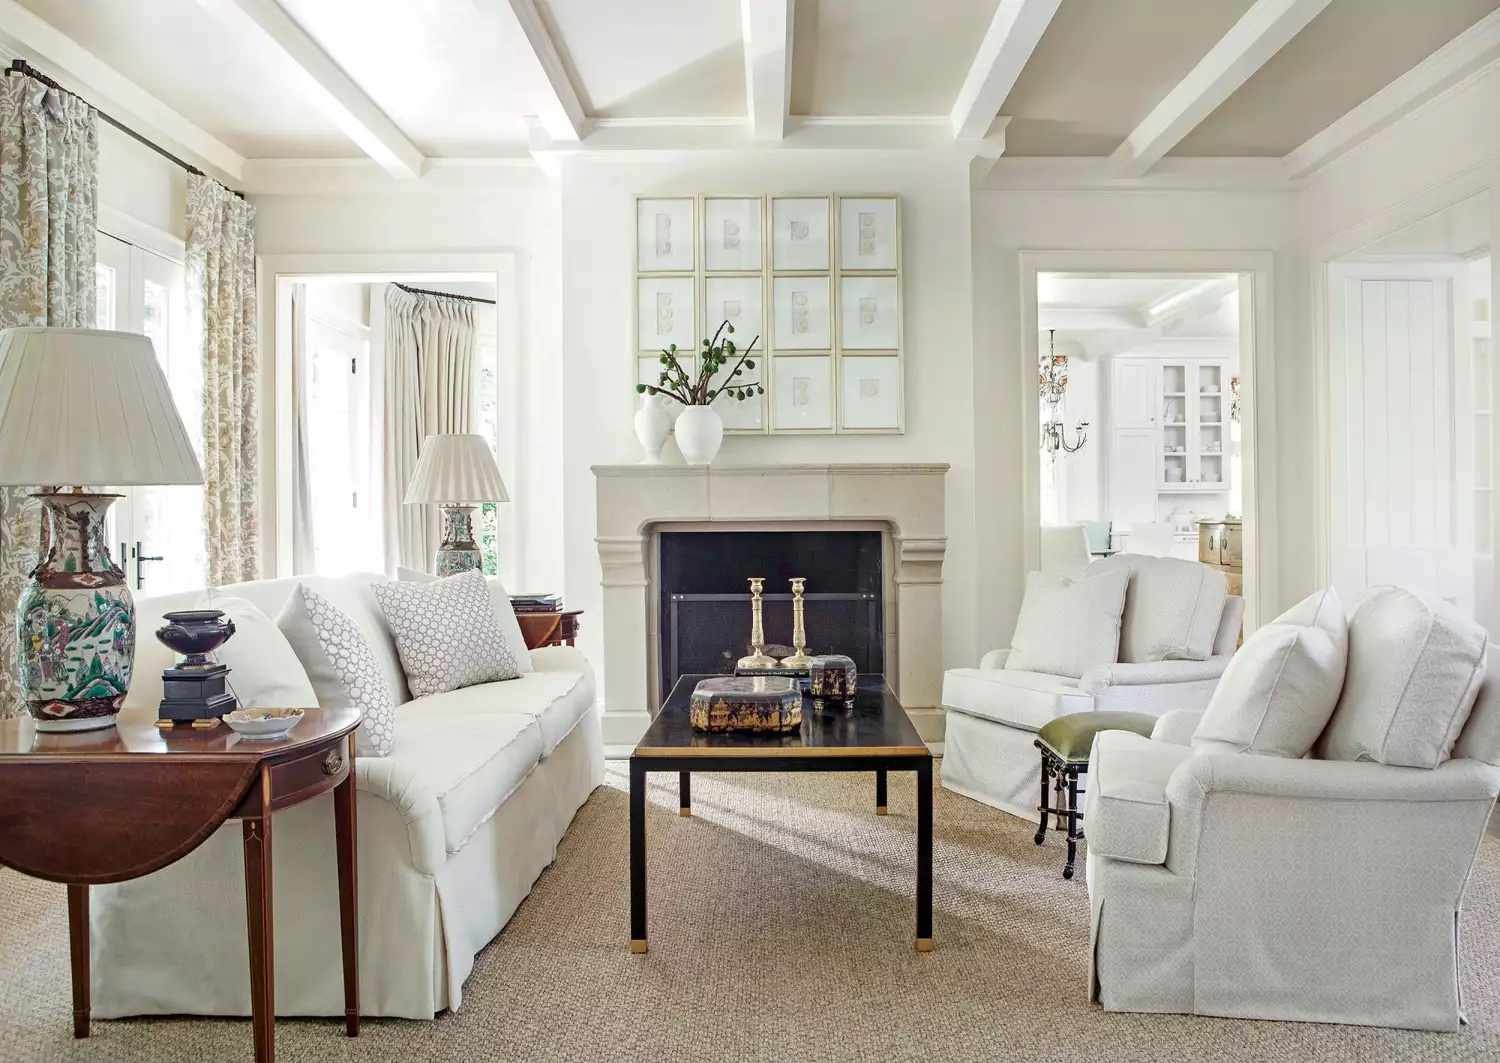 15 Designer-Approved Touches To Add Southern Charm To Any Home